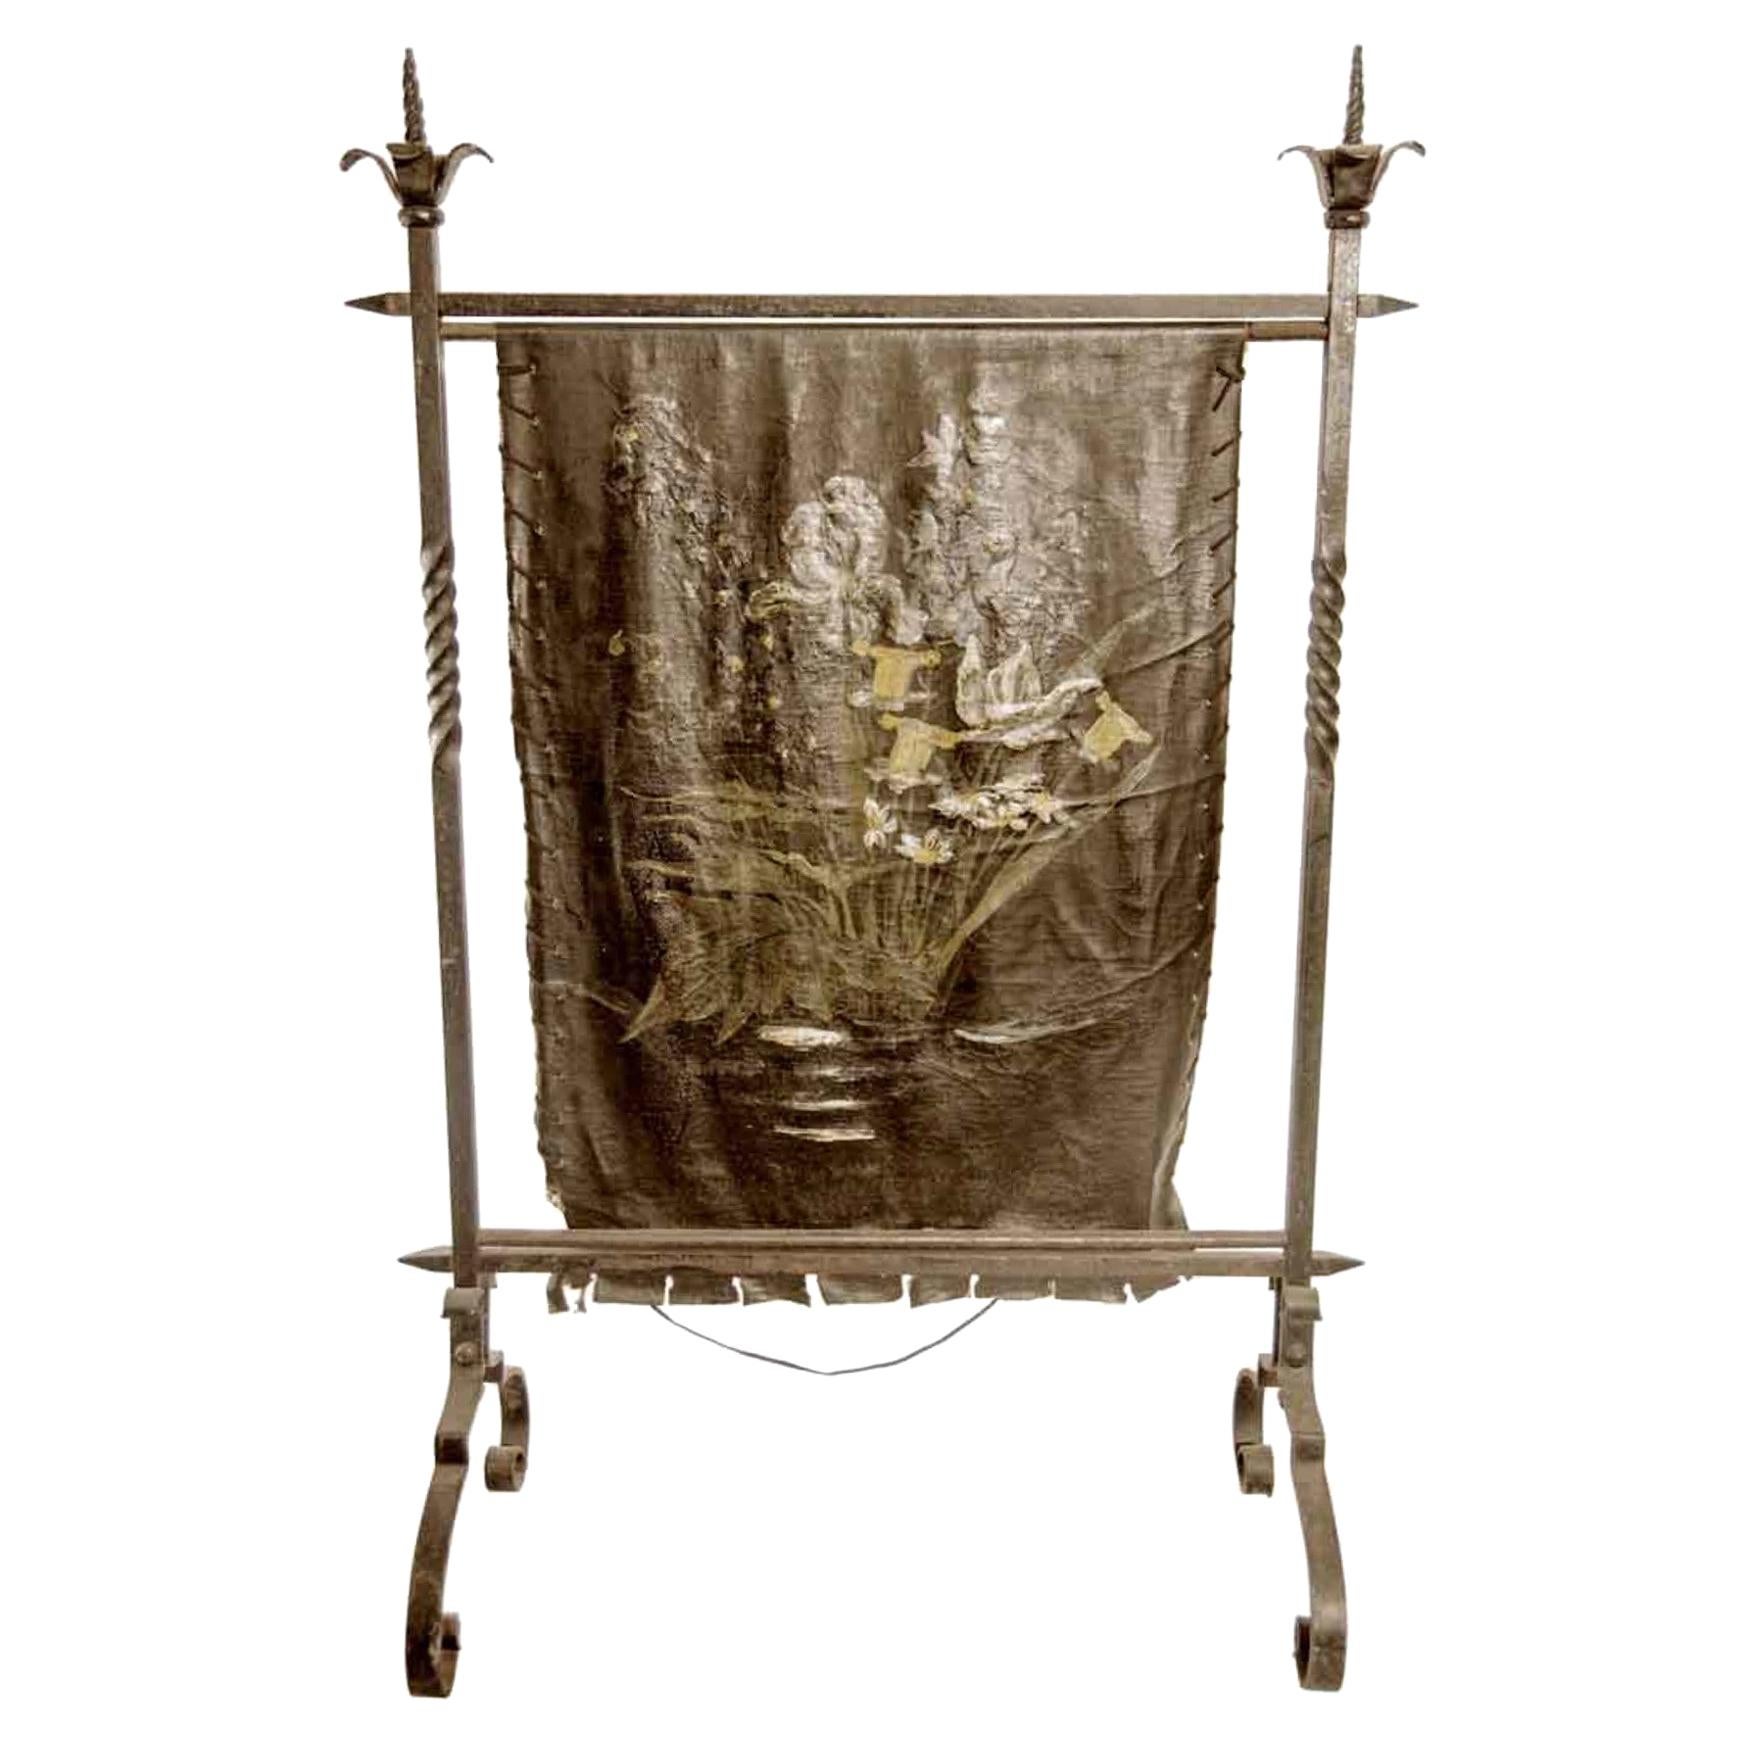 1890s Antique French Wrought Iron and Painted Floral Leather Fire Screen